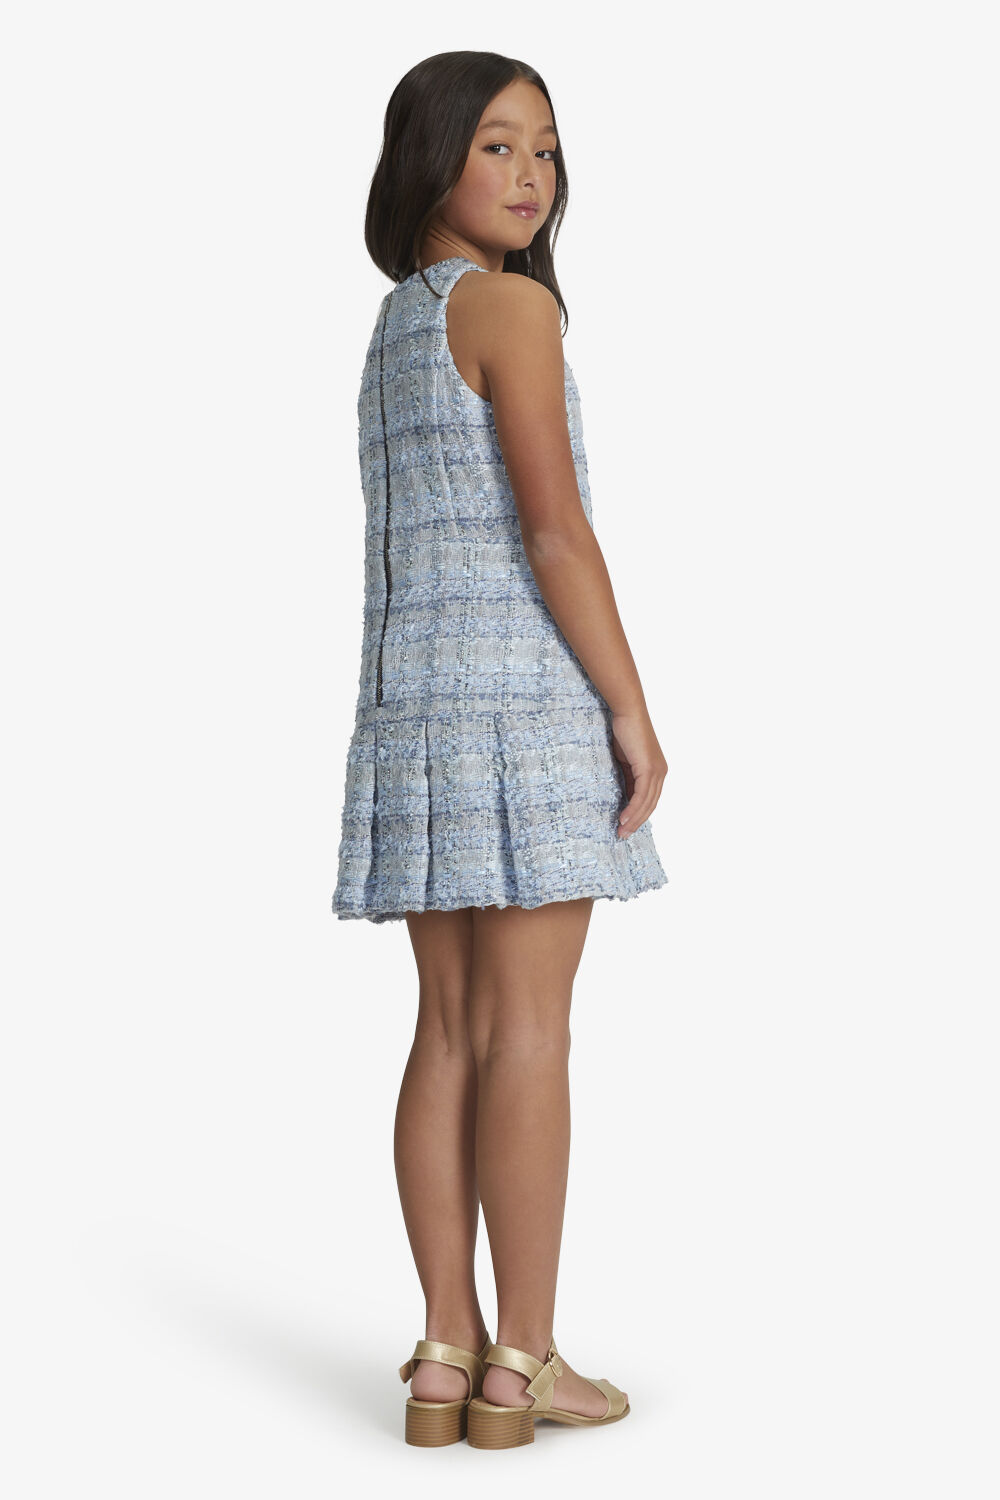 GIRLS MIAMI BOUCLE DRESS in colour CLASSIC BLUE